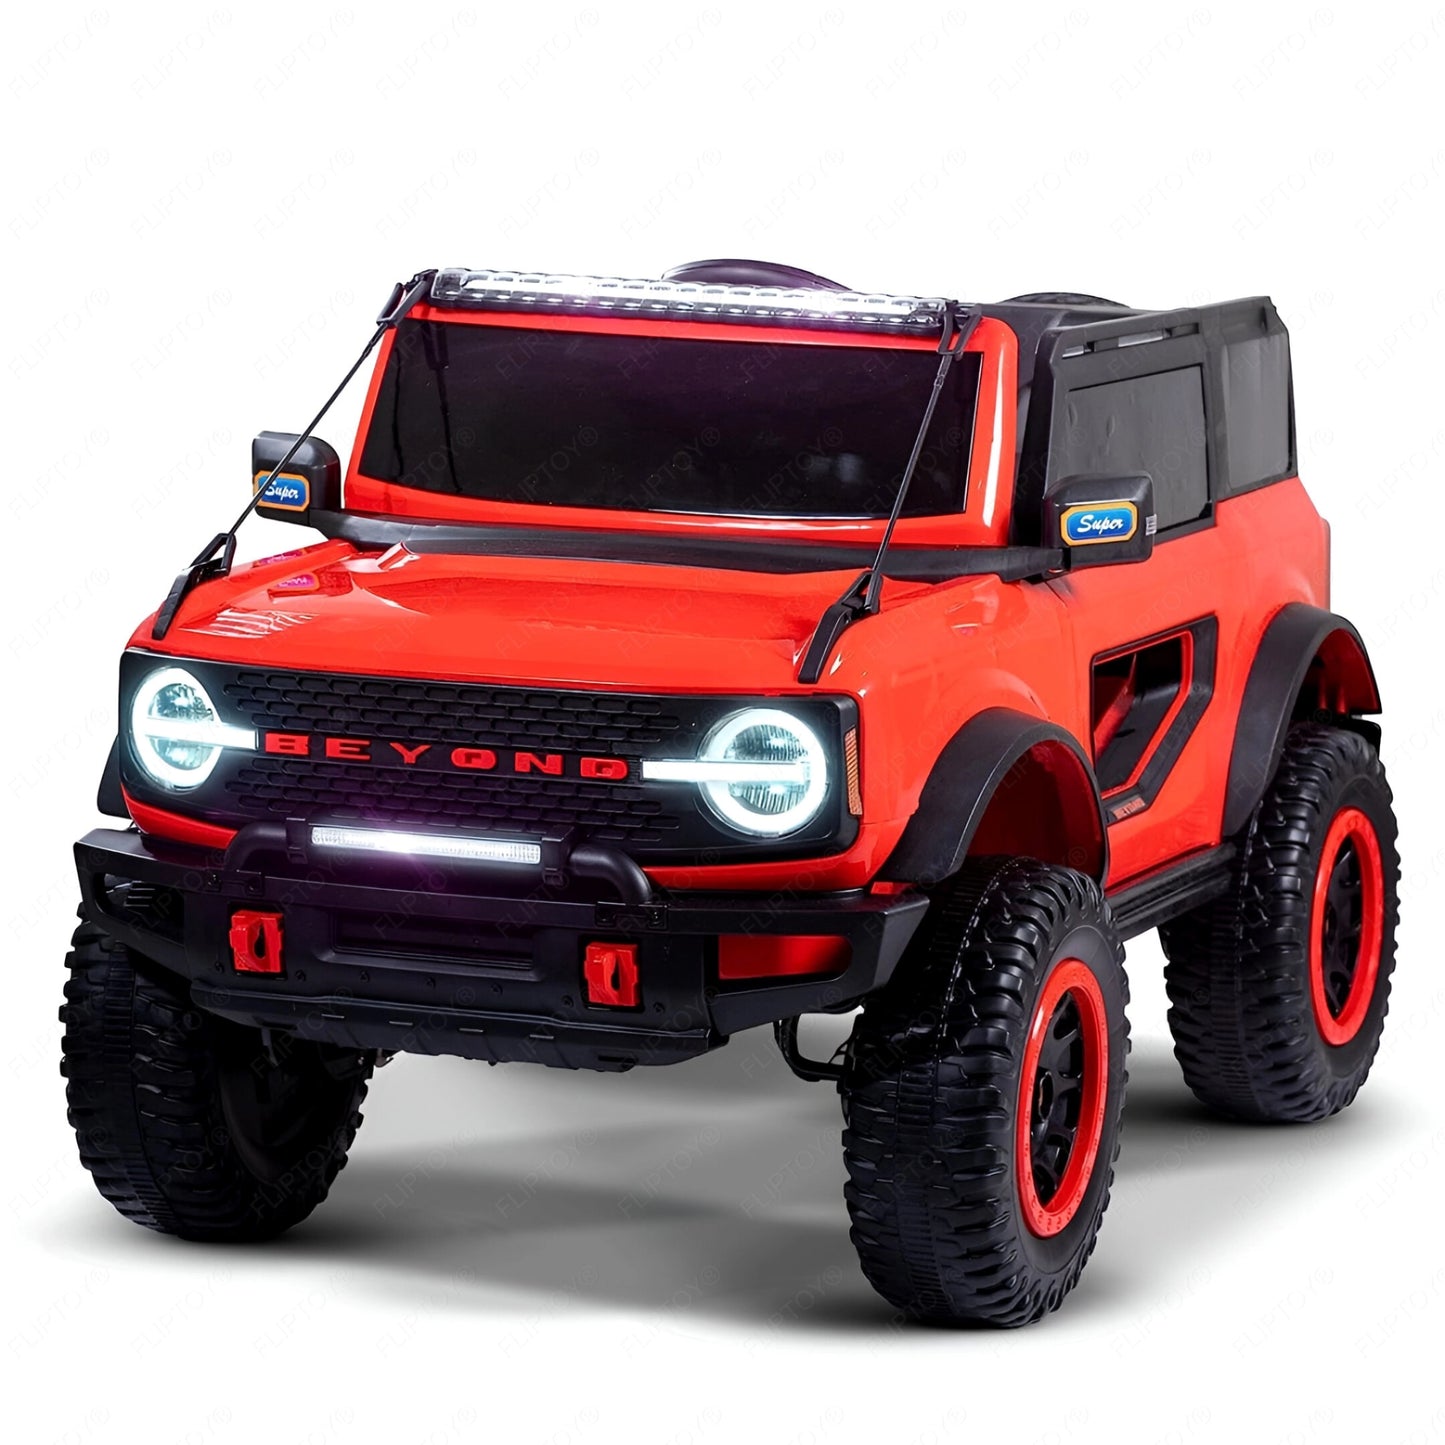 Baby, Ride on jeep, 12-volt battery operated, led Headlights, inbuilt music, USB, Aux & remote controller